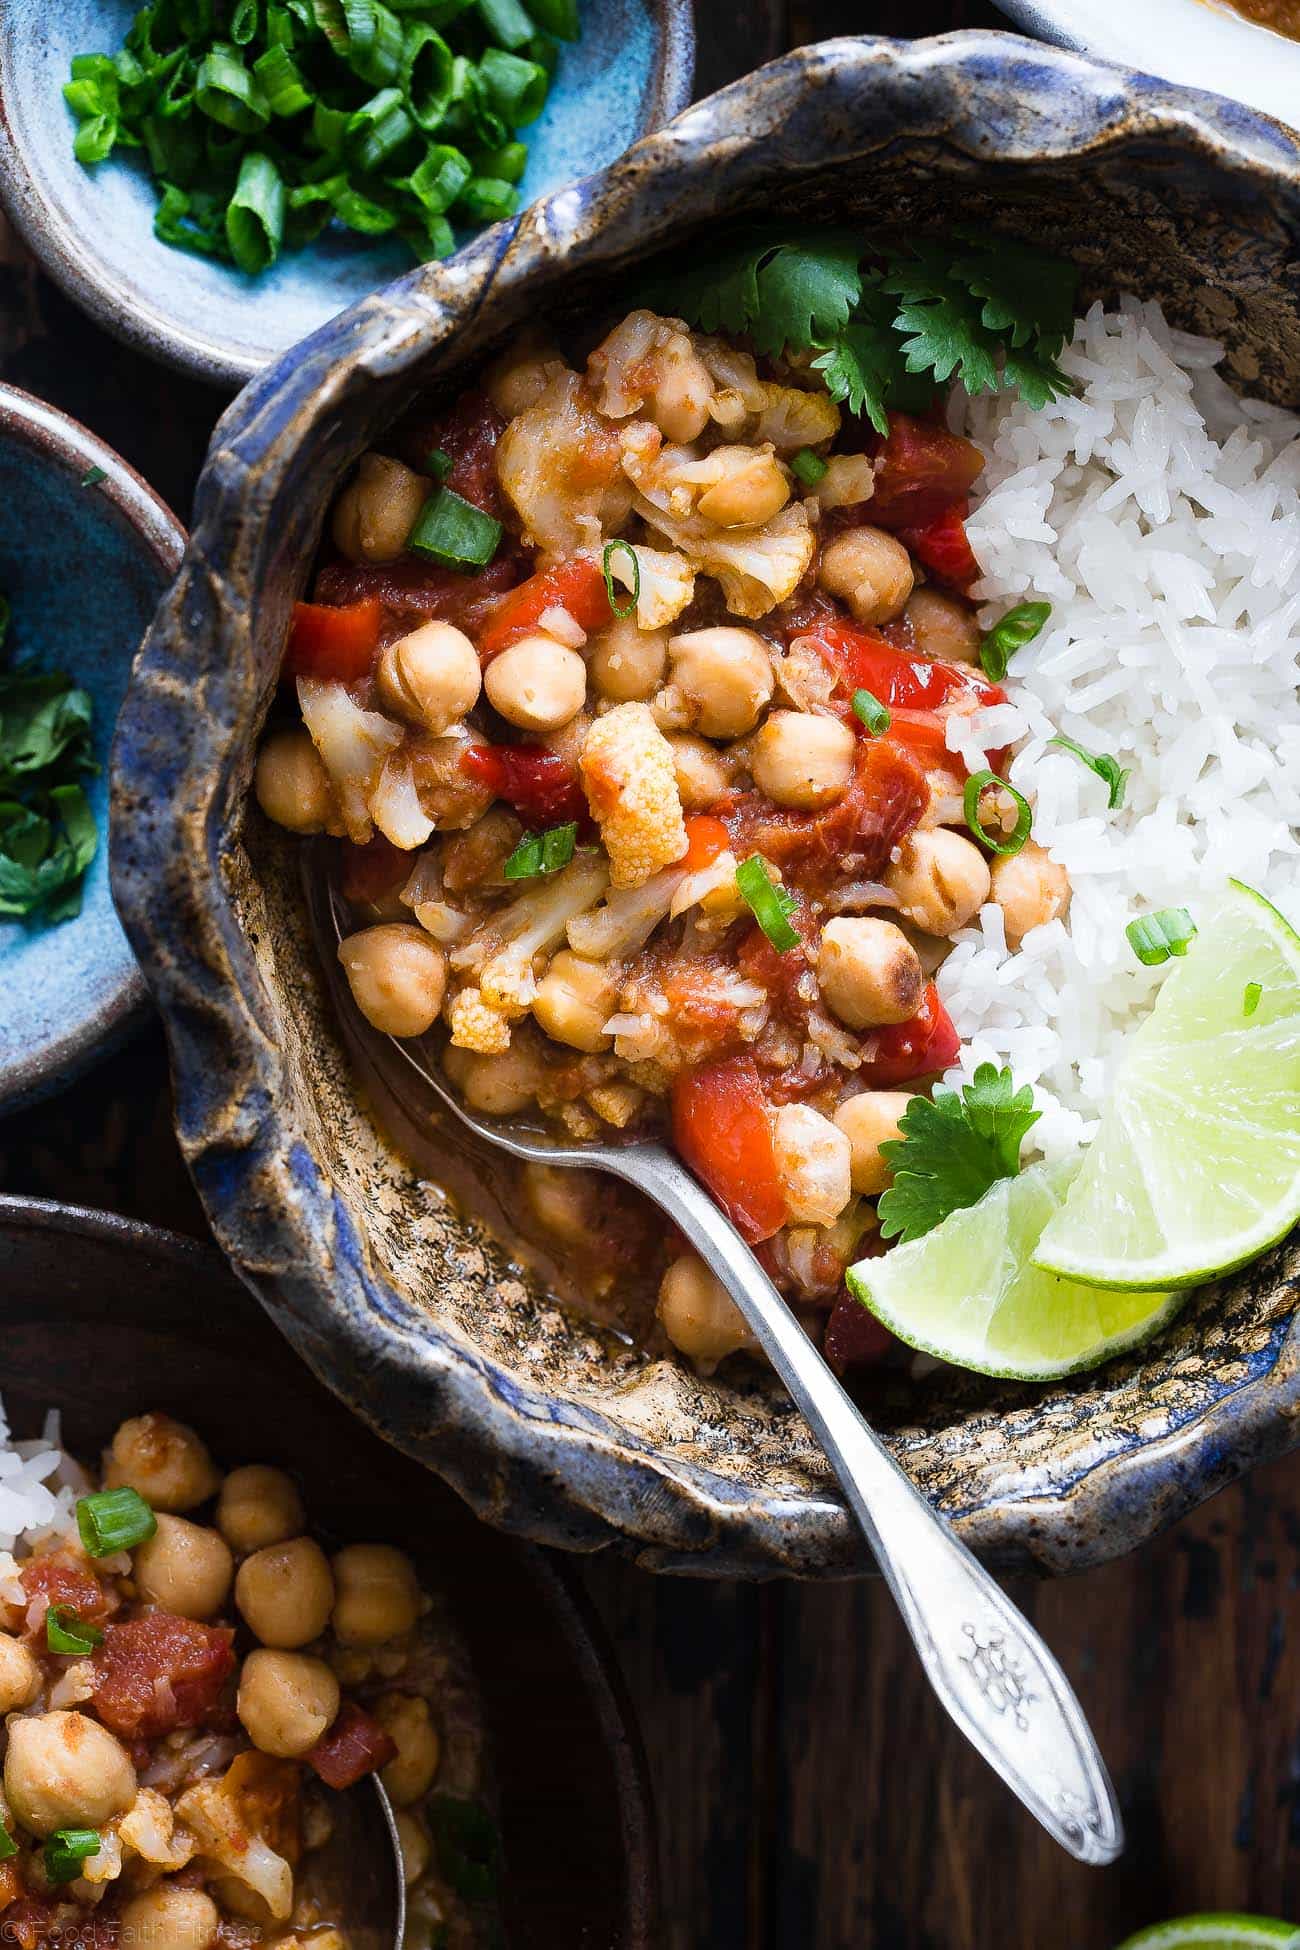 Instant Pot Vegan Chickpea Curry - This easy chickpea tomato curry is made in the Instant Pot and ready in 20 mins! It uses coconut milk and tomatoes to make it thick and so creamy! Makes great leftovers and is great for meal prep! | Foodfaithfitness.com | @FoodFaithFit